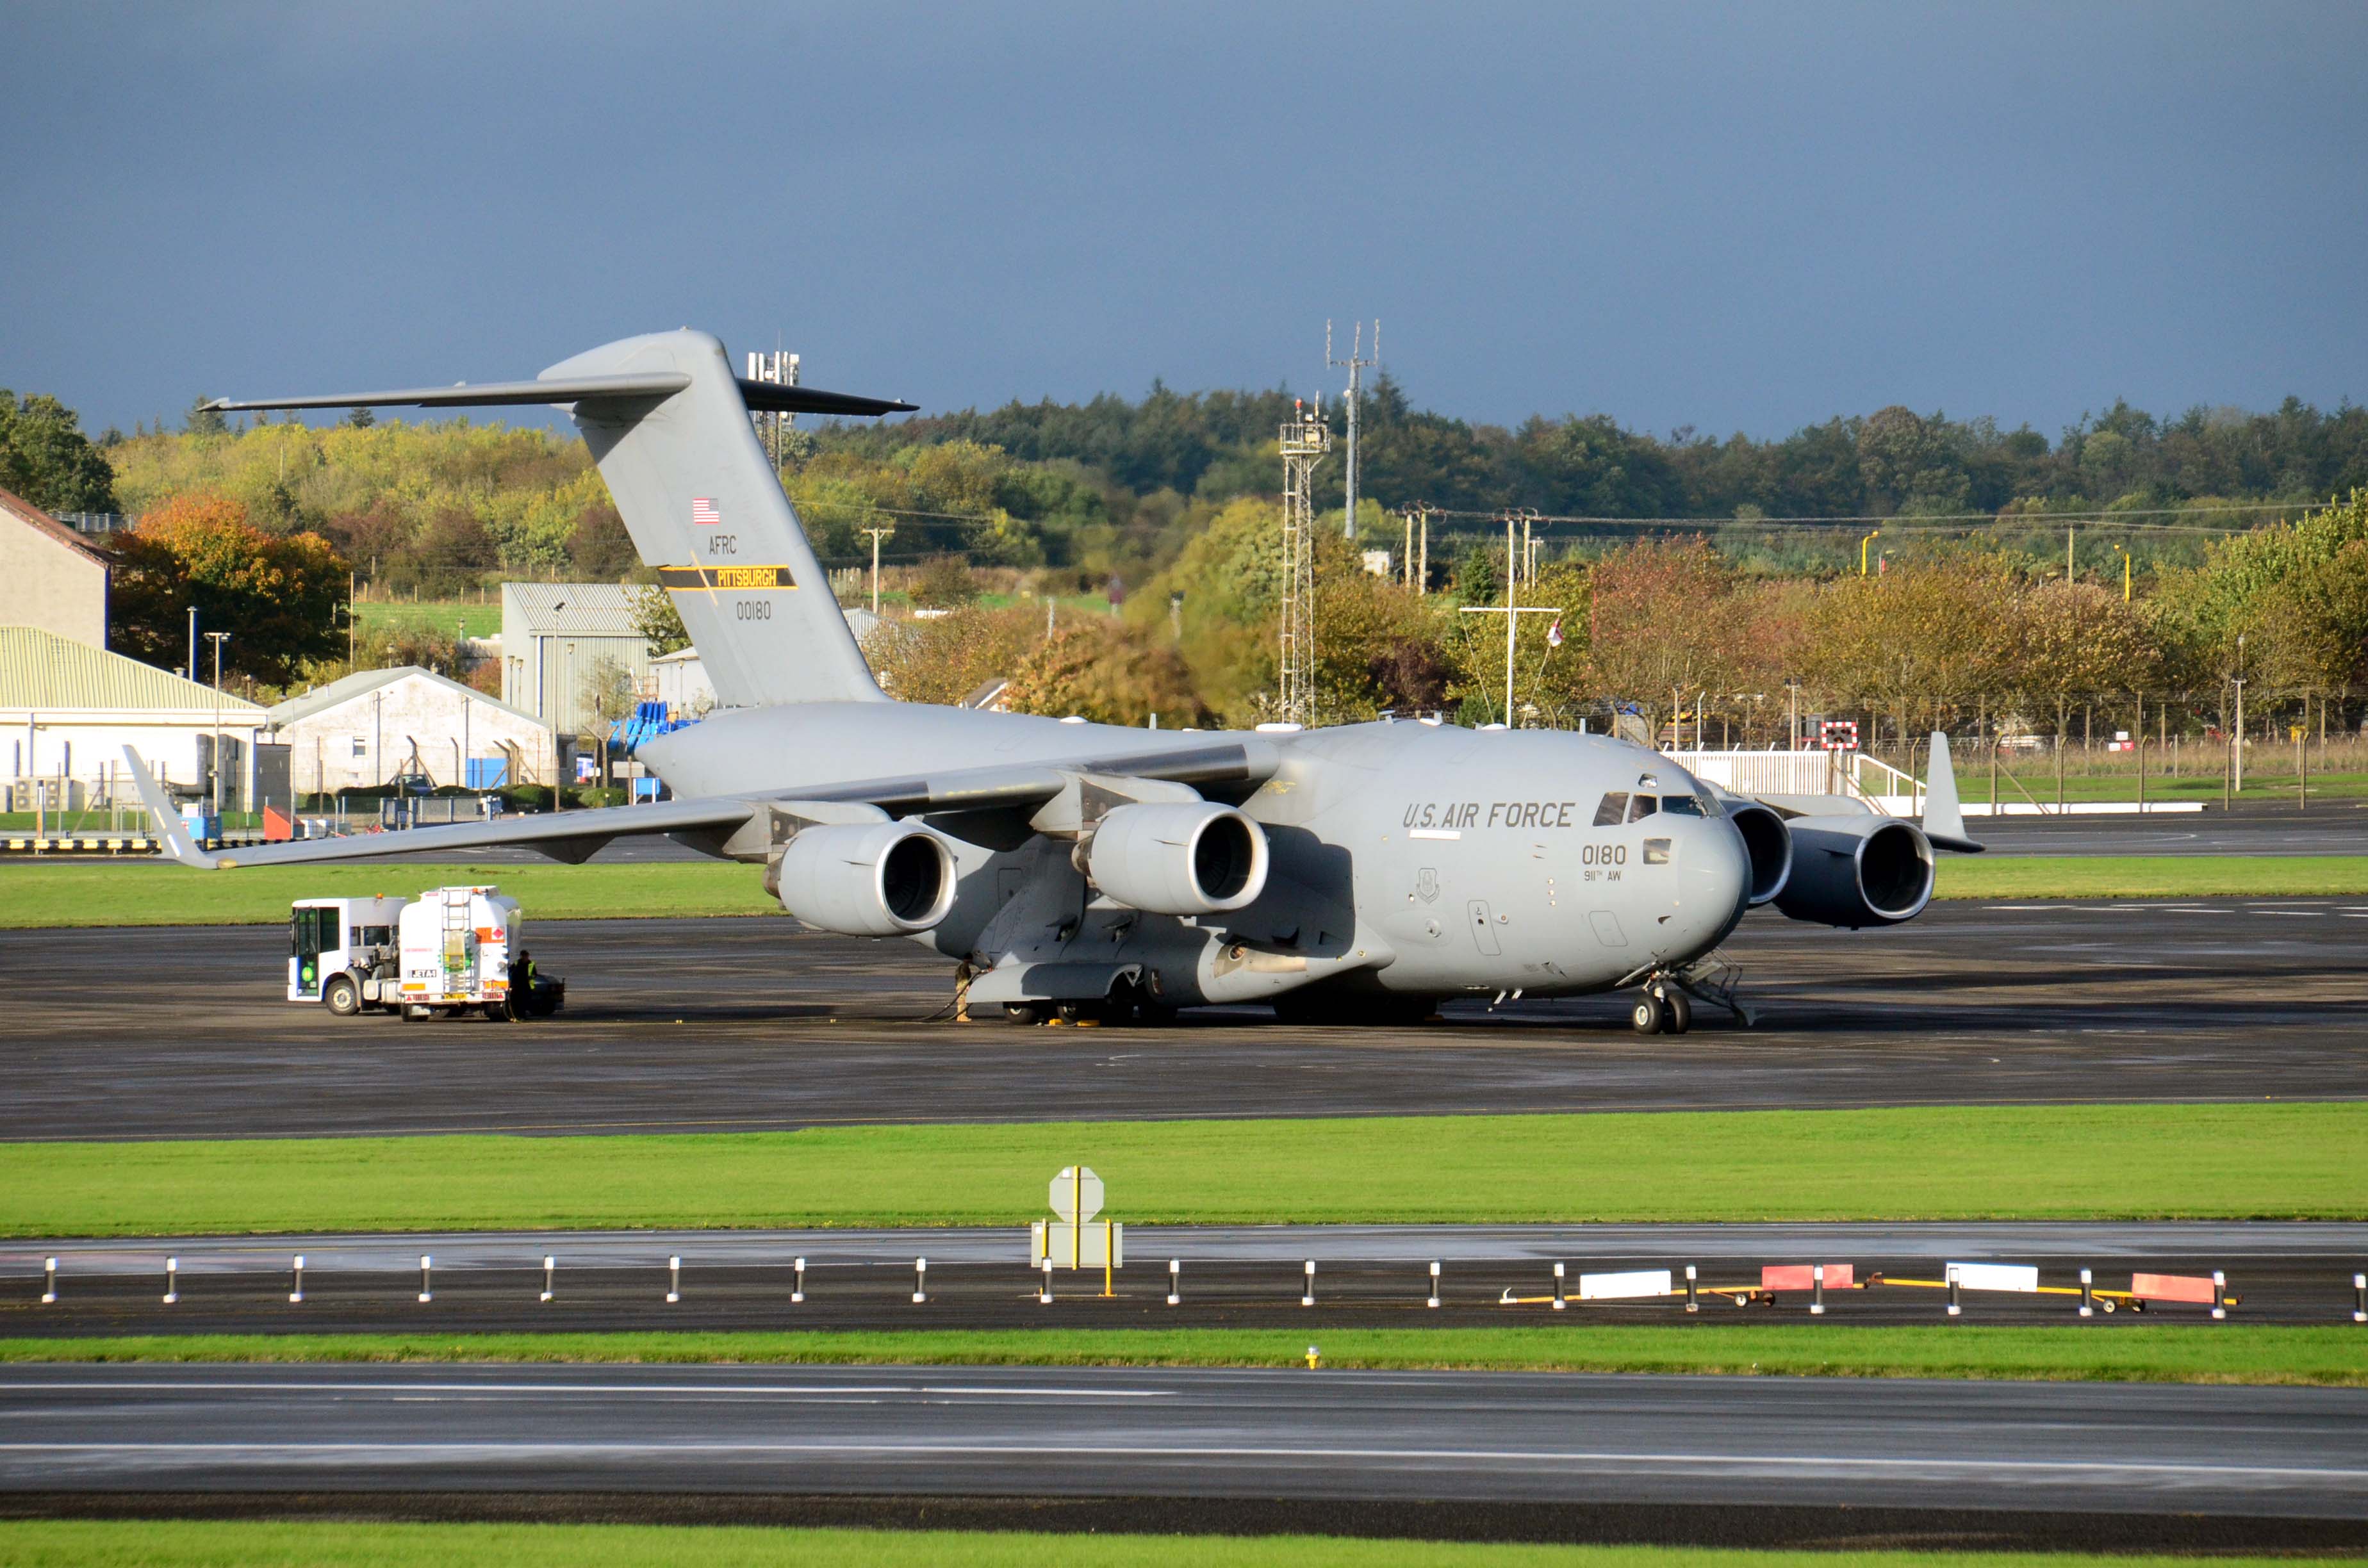 00-0180/000180 USAF - United States Air Force Boeing C-17 Globemaster III Airframe Information - AVSpotters.com